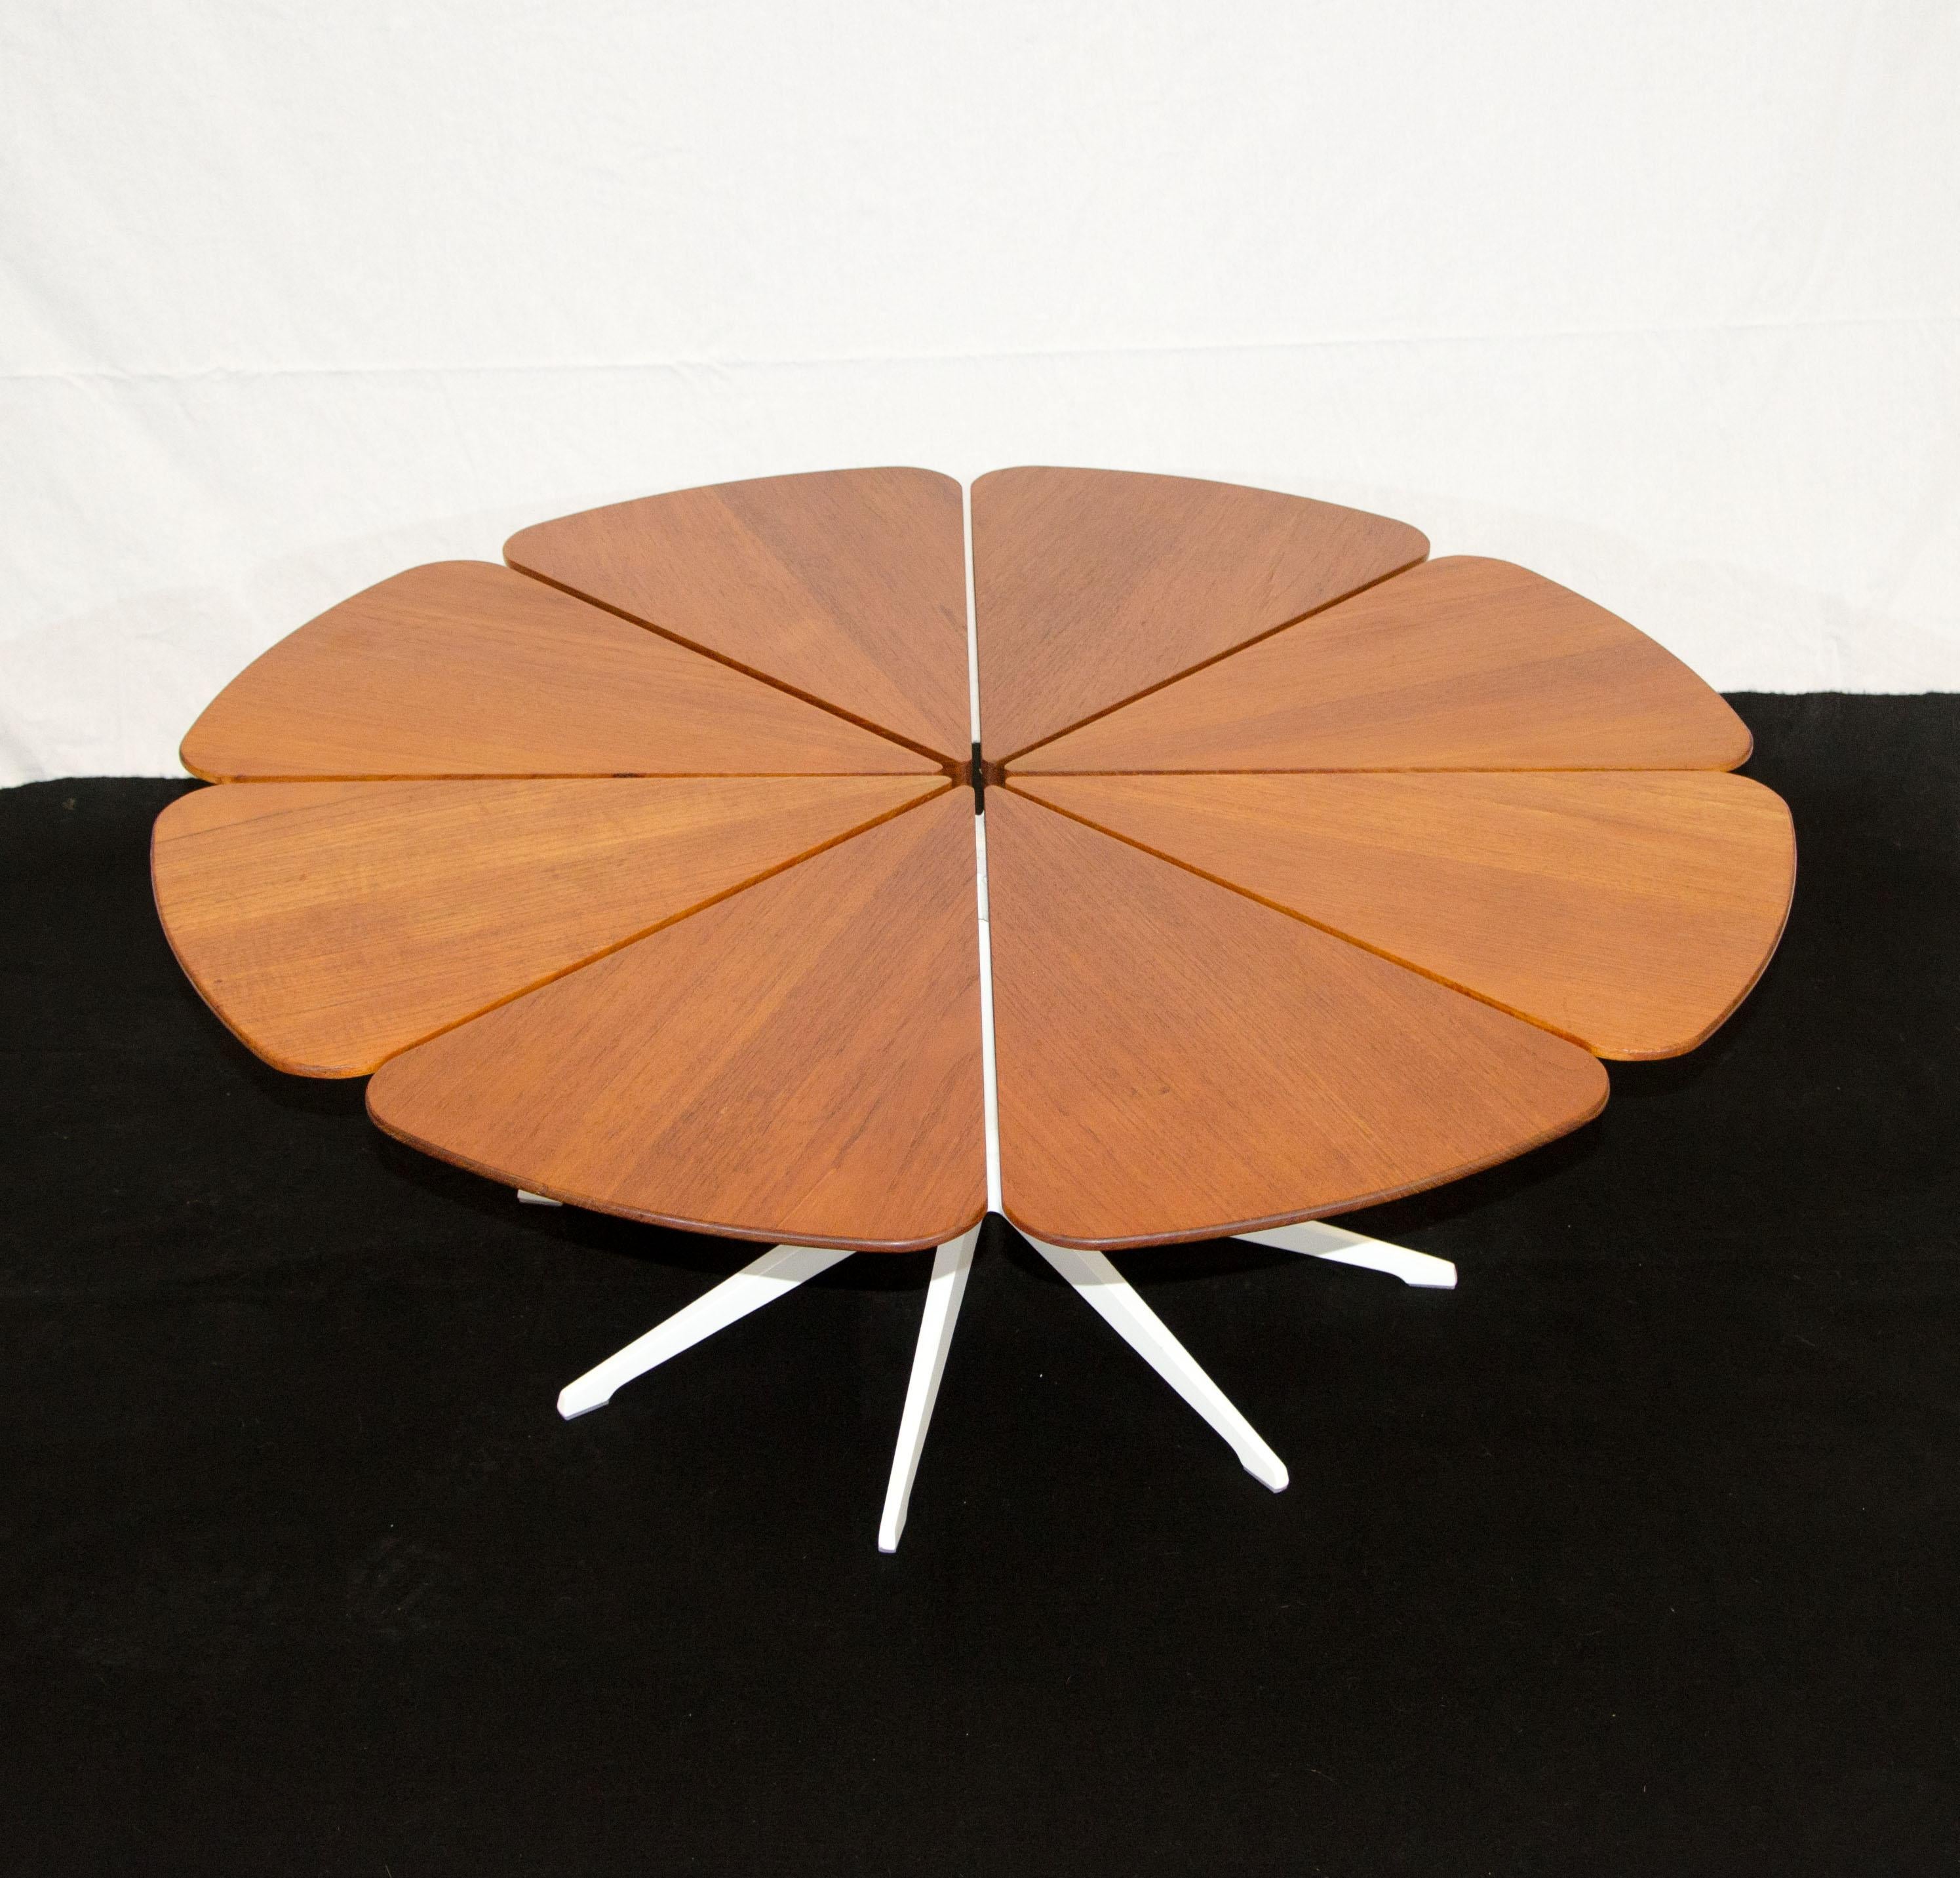 Iconic petal table designed by Richard Schultz and manufactured by Knoll. The eight separate petal tops are solid vertical grain teak and are being supported by a powder-coated cast aluminum framework and powder-coated stainless steel stem. The